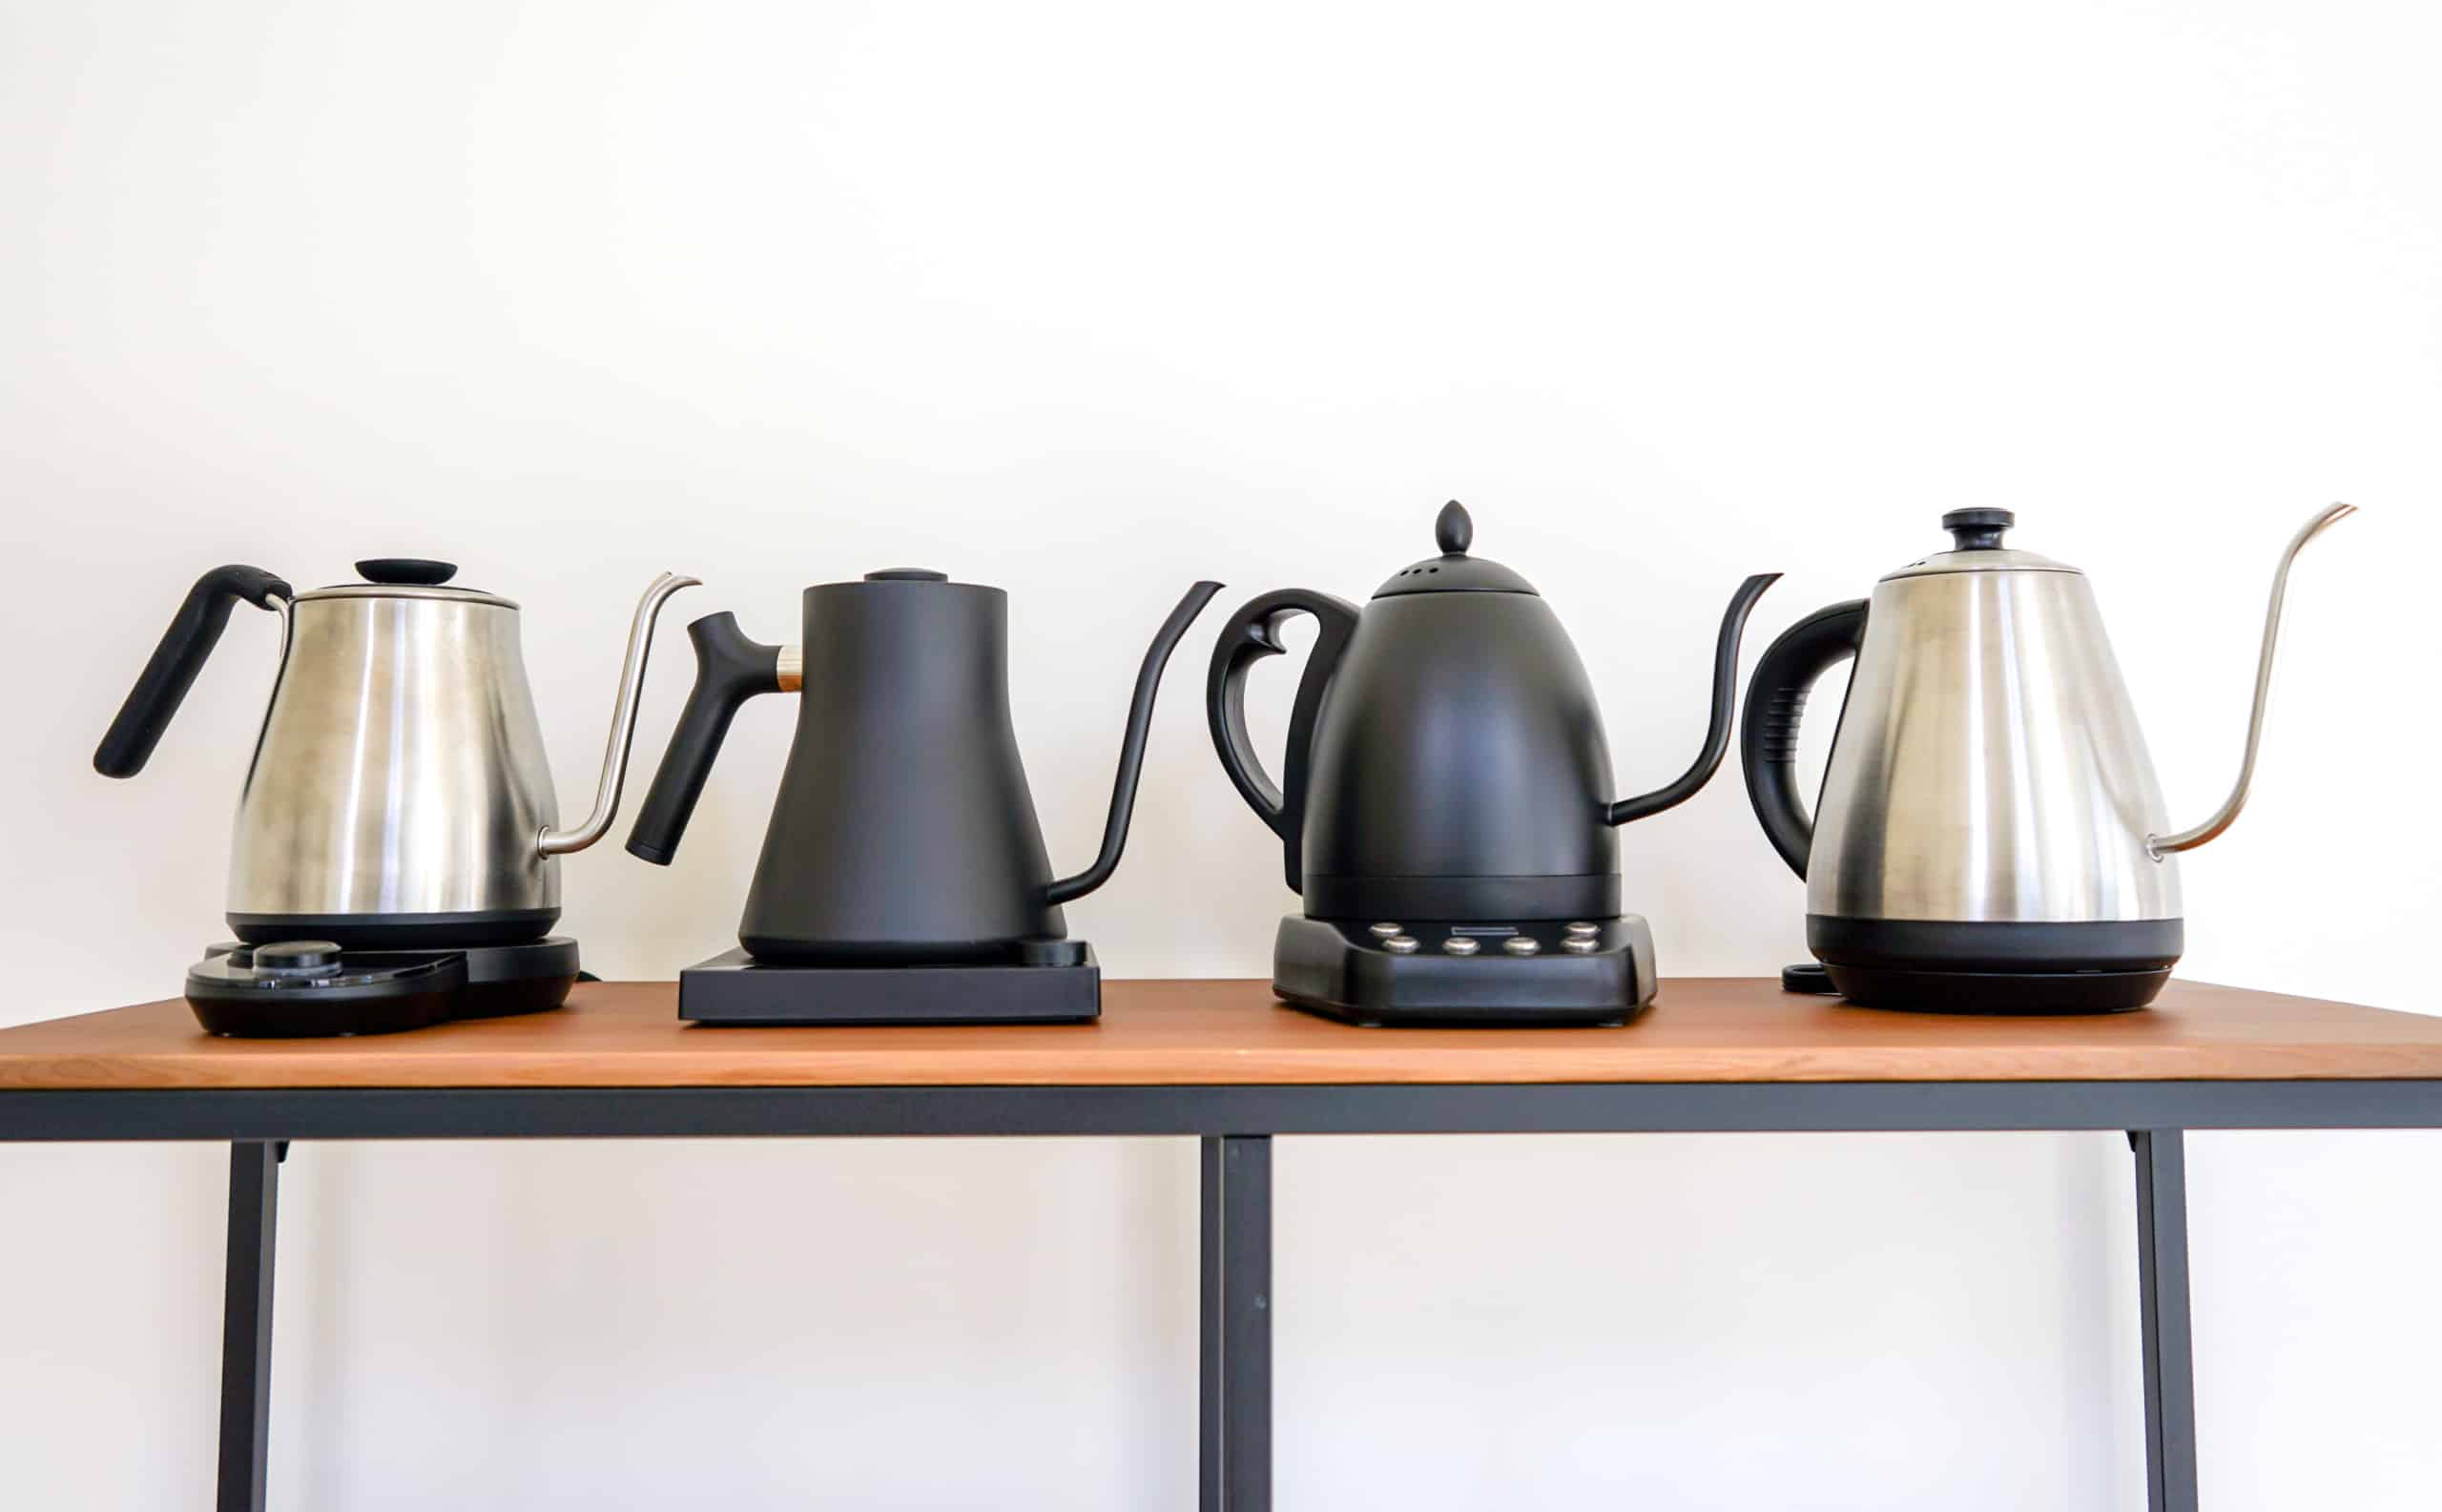 Bonavita Electric Kettle Review: Perfect For Pour-Overs?